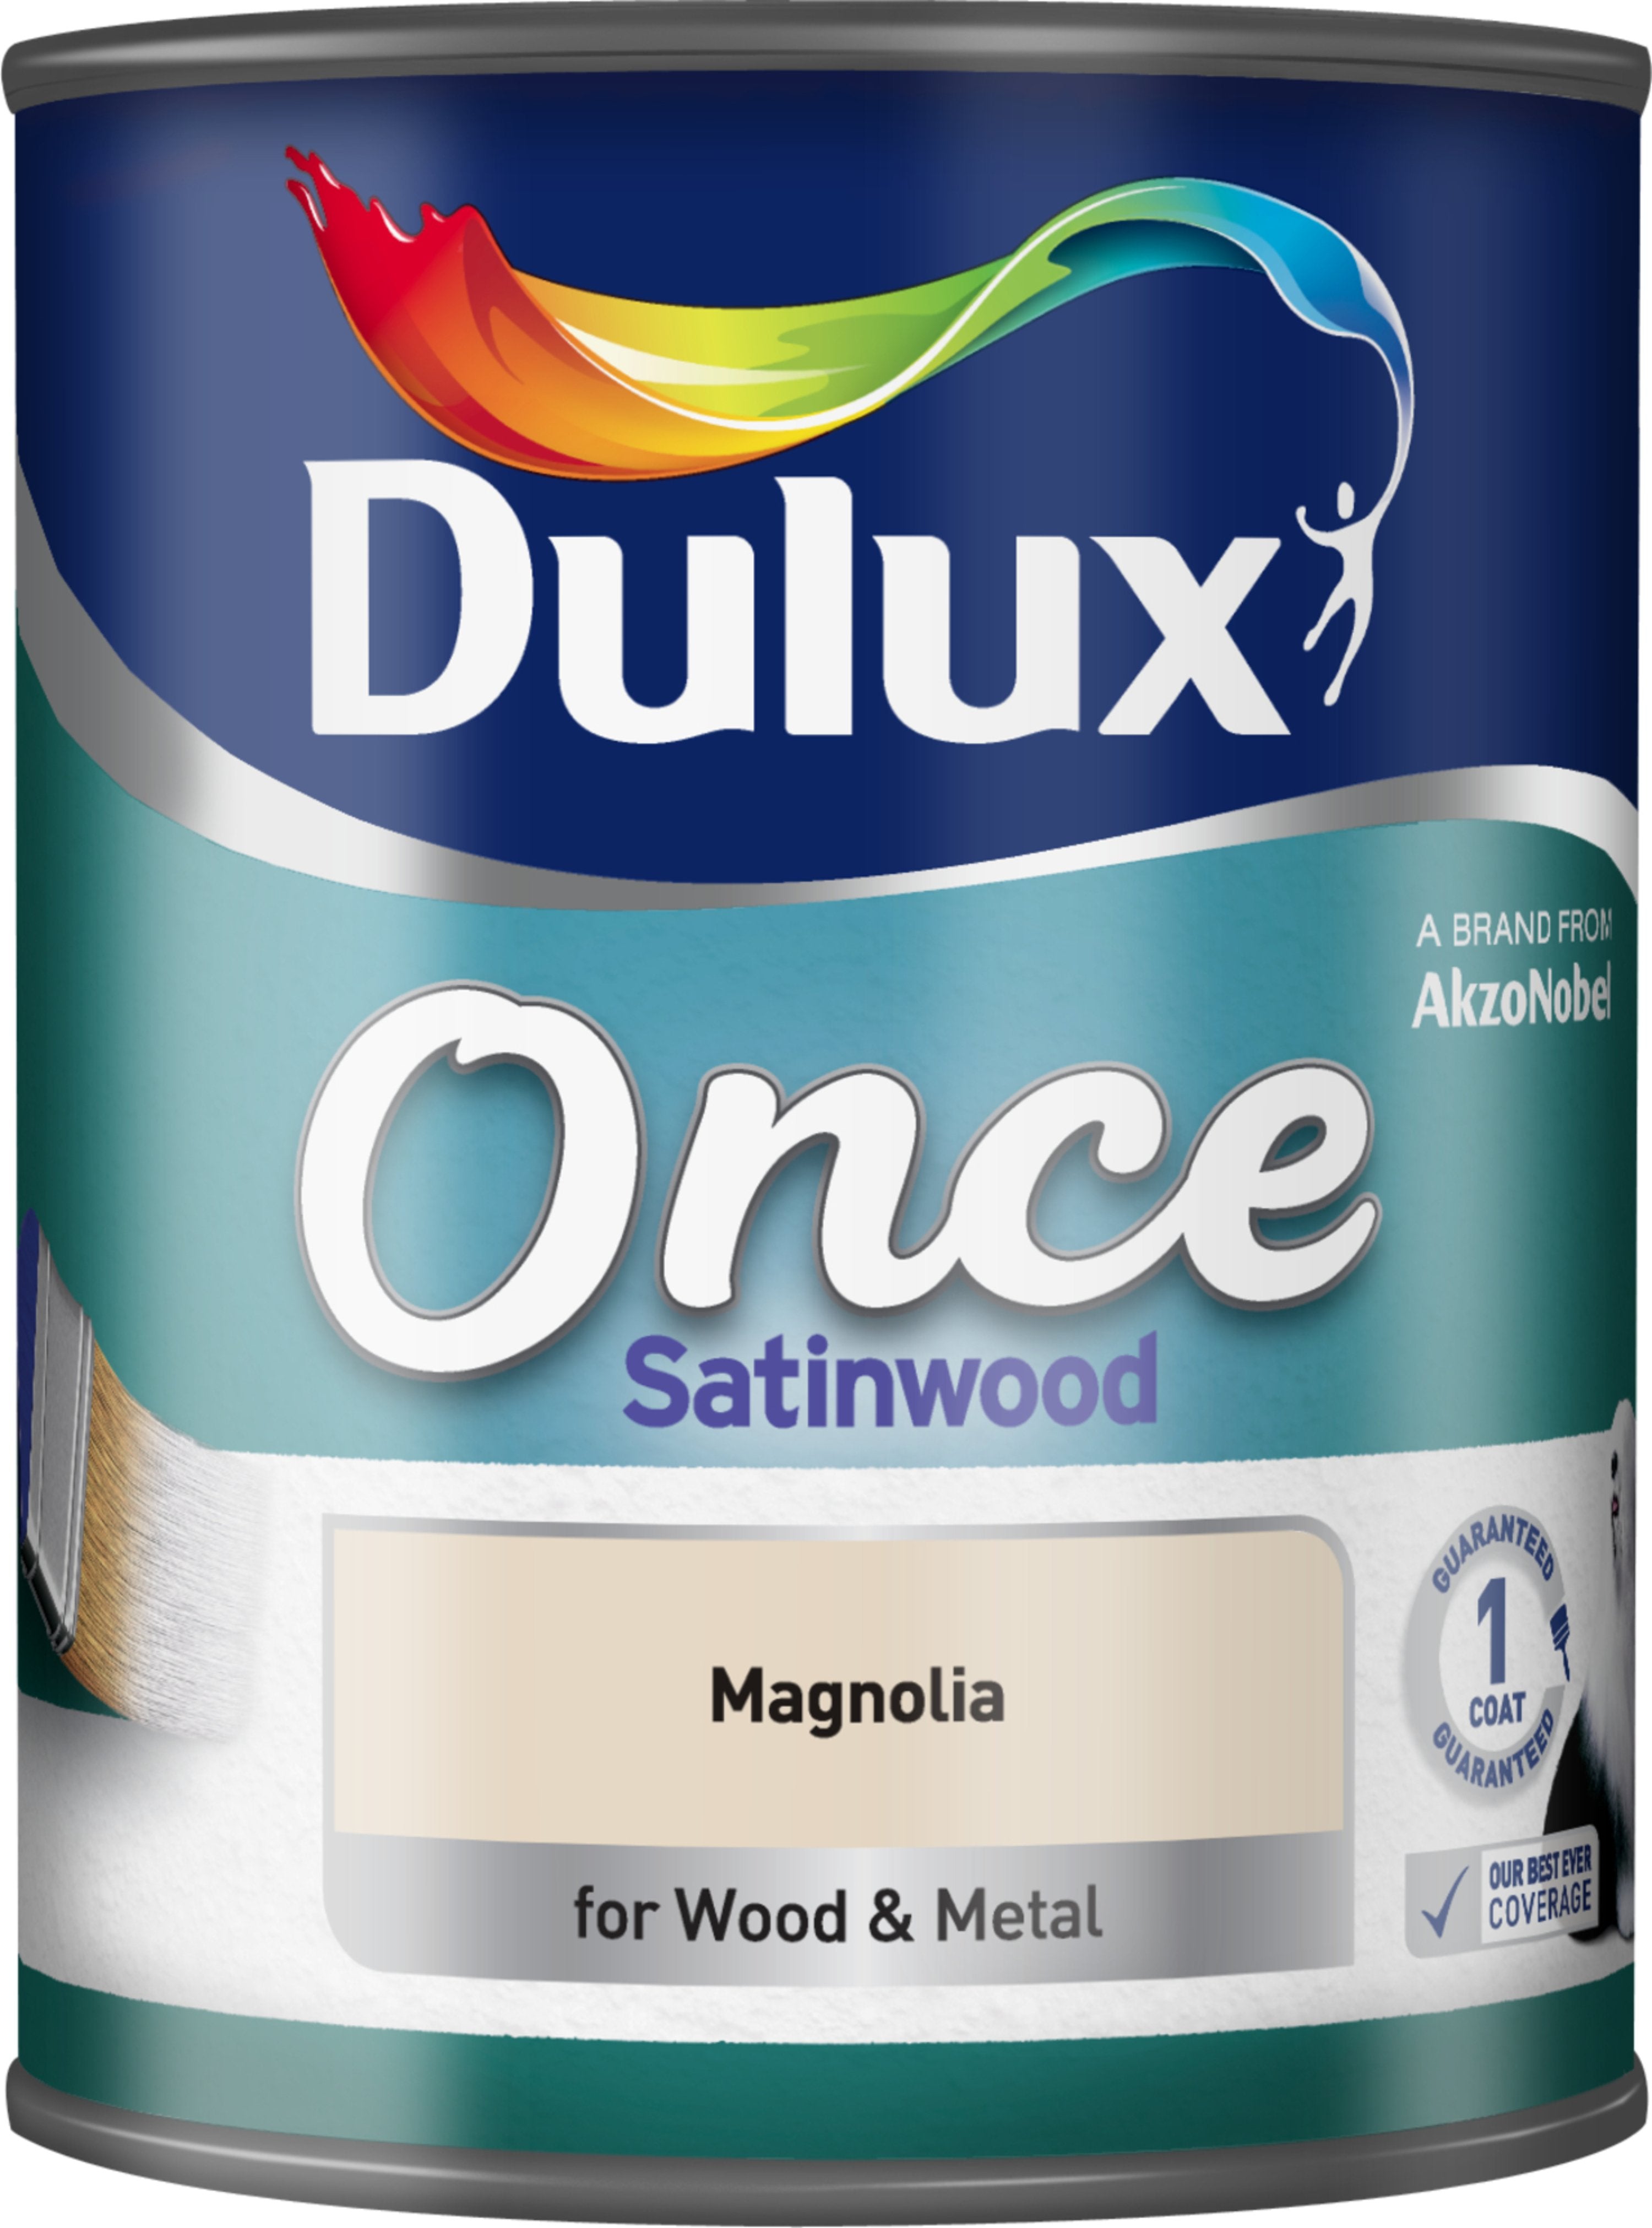 Dulux-Once-Satinwood-Paint-For-Wood-And-Metal-Magnolia-750ml